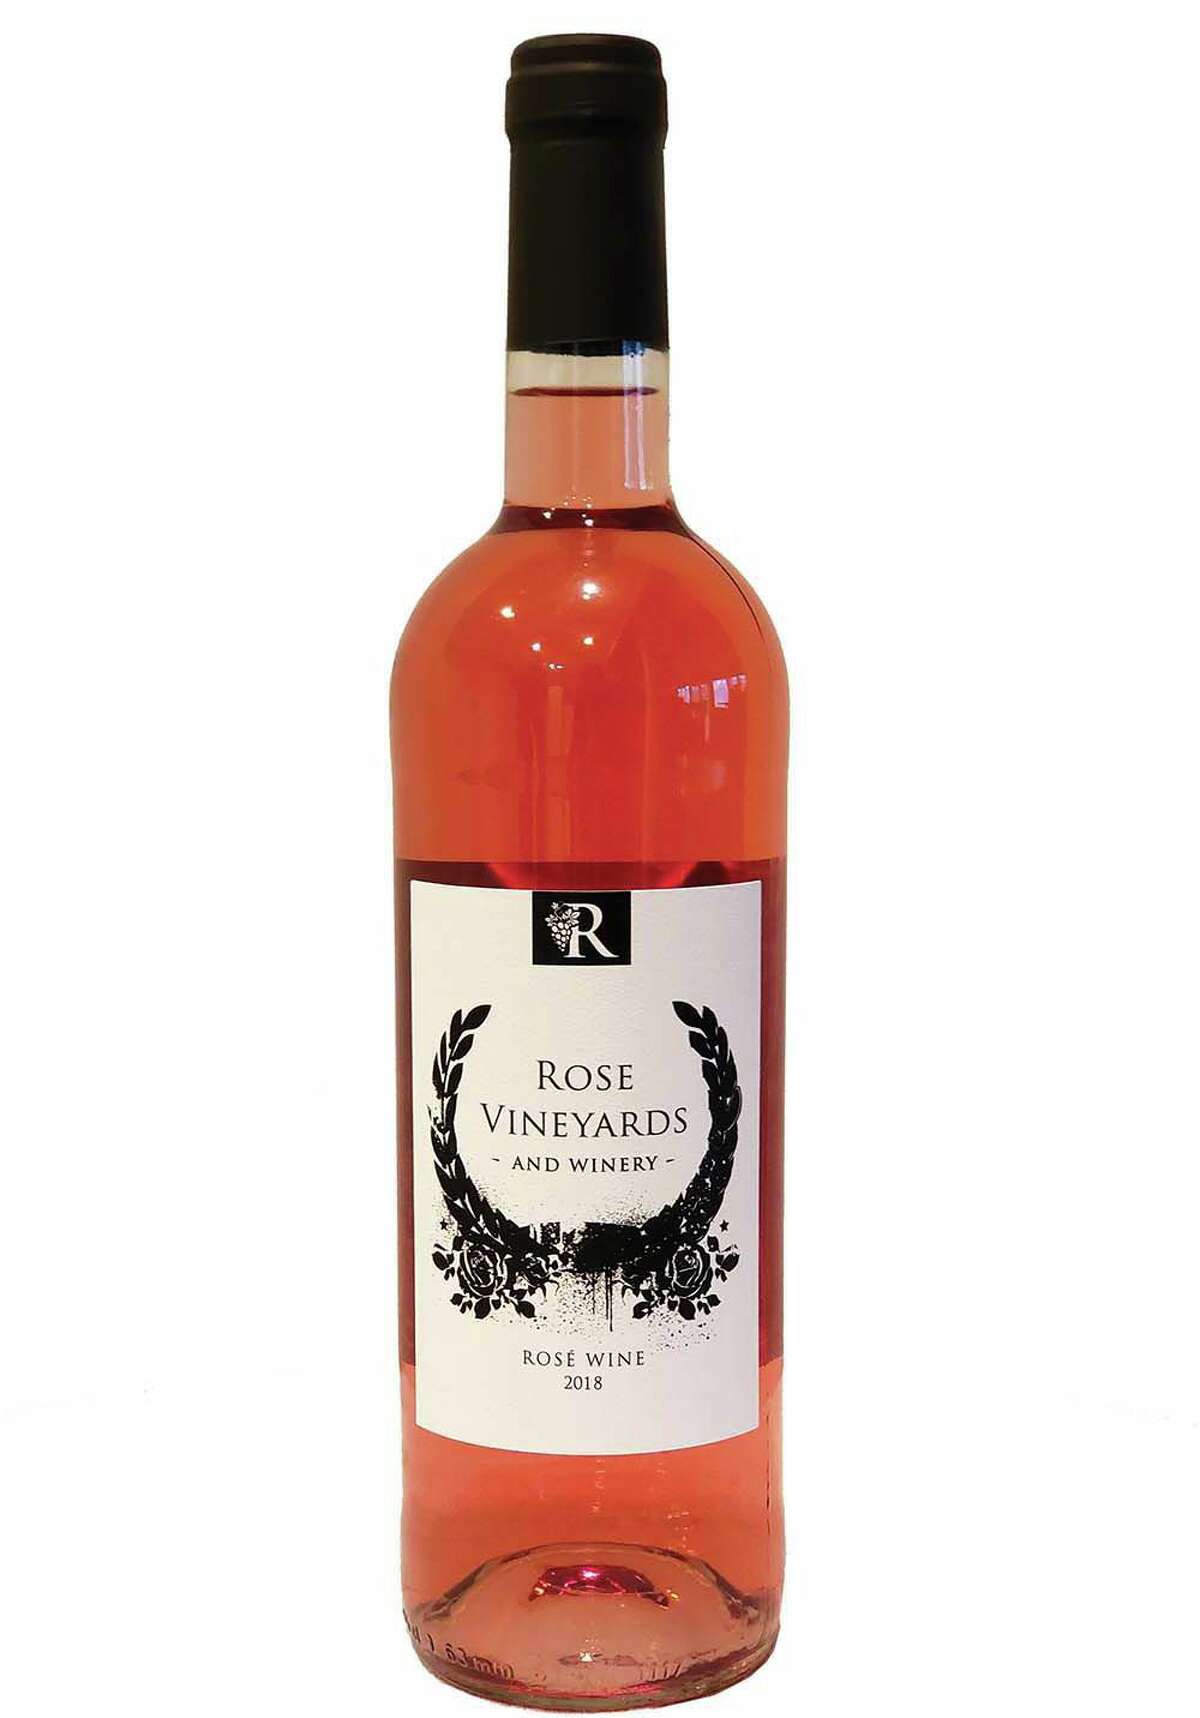 Rose Vineyards and Winery Rosé 2018